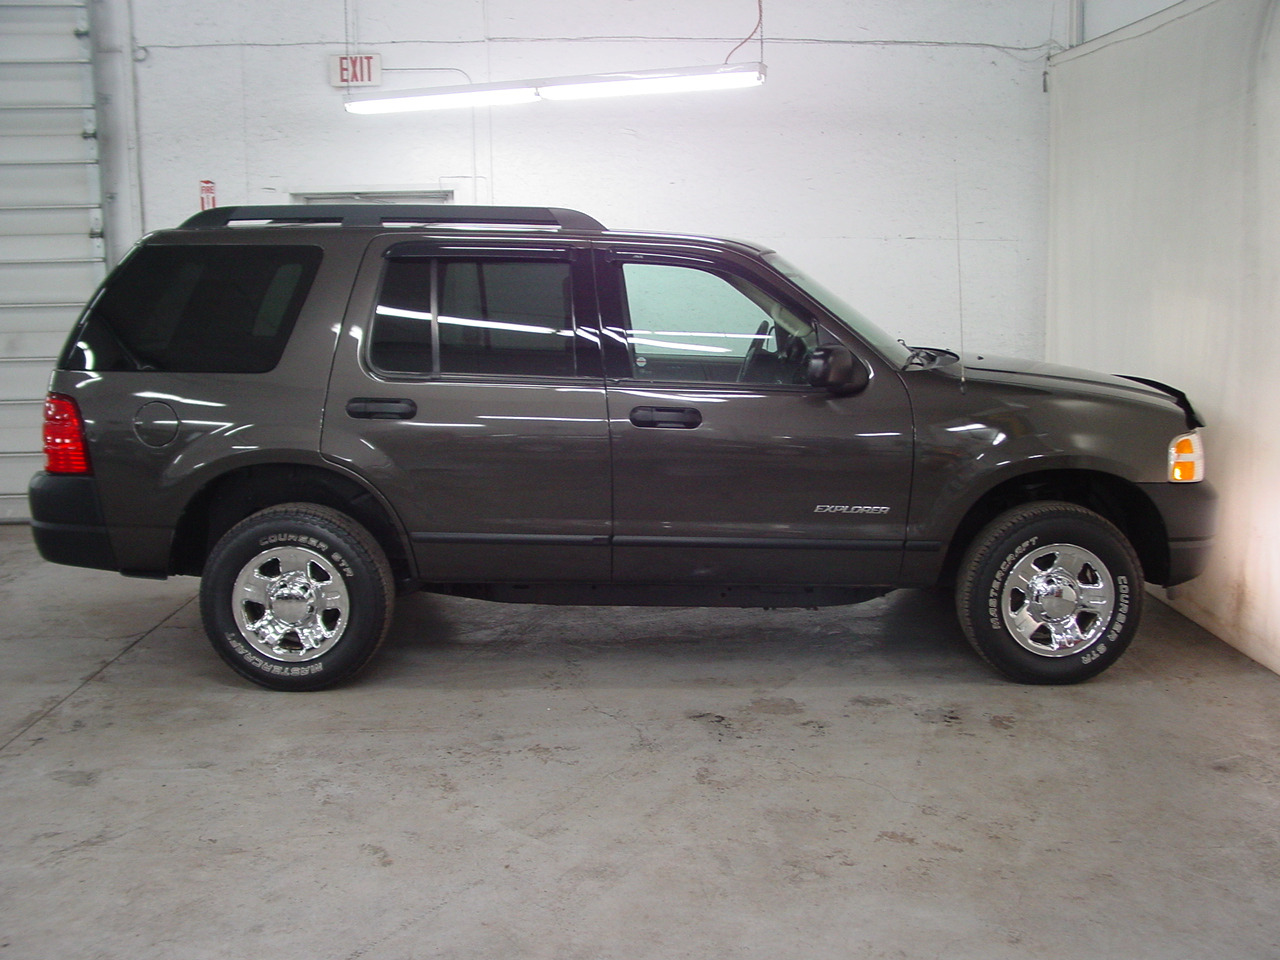 2005 Ford Explorer XLS - Biscayne Auto Sales | Pre-owned Dealership |  Ontario, NY